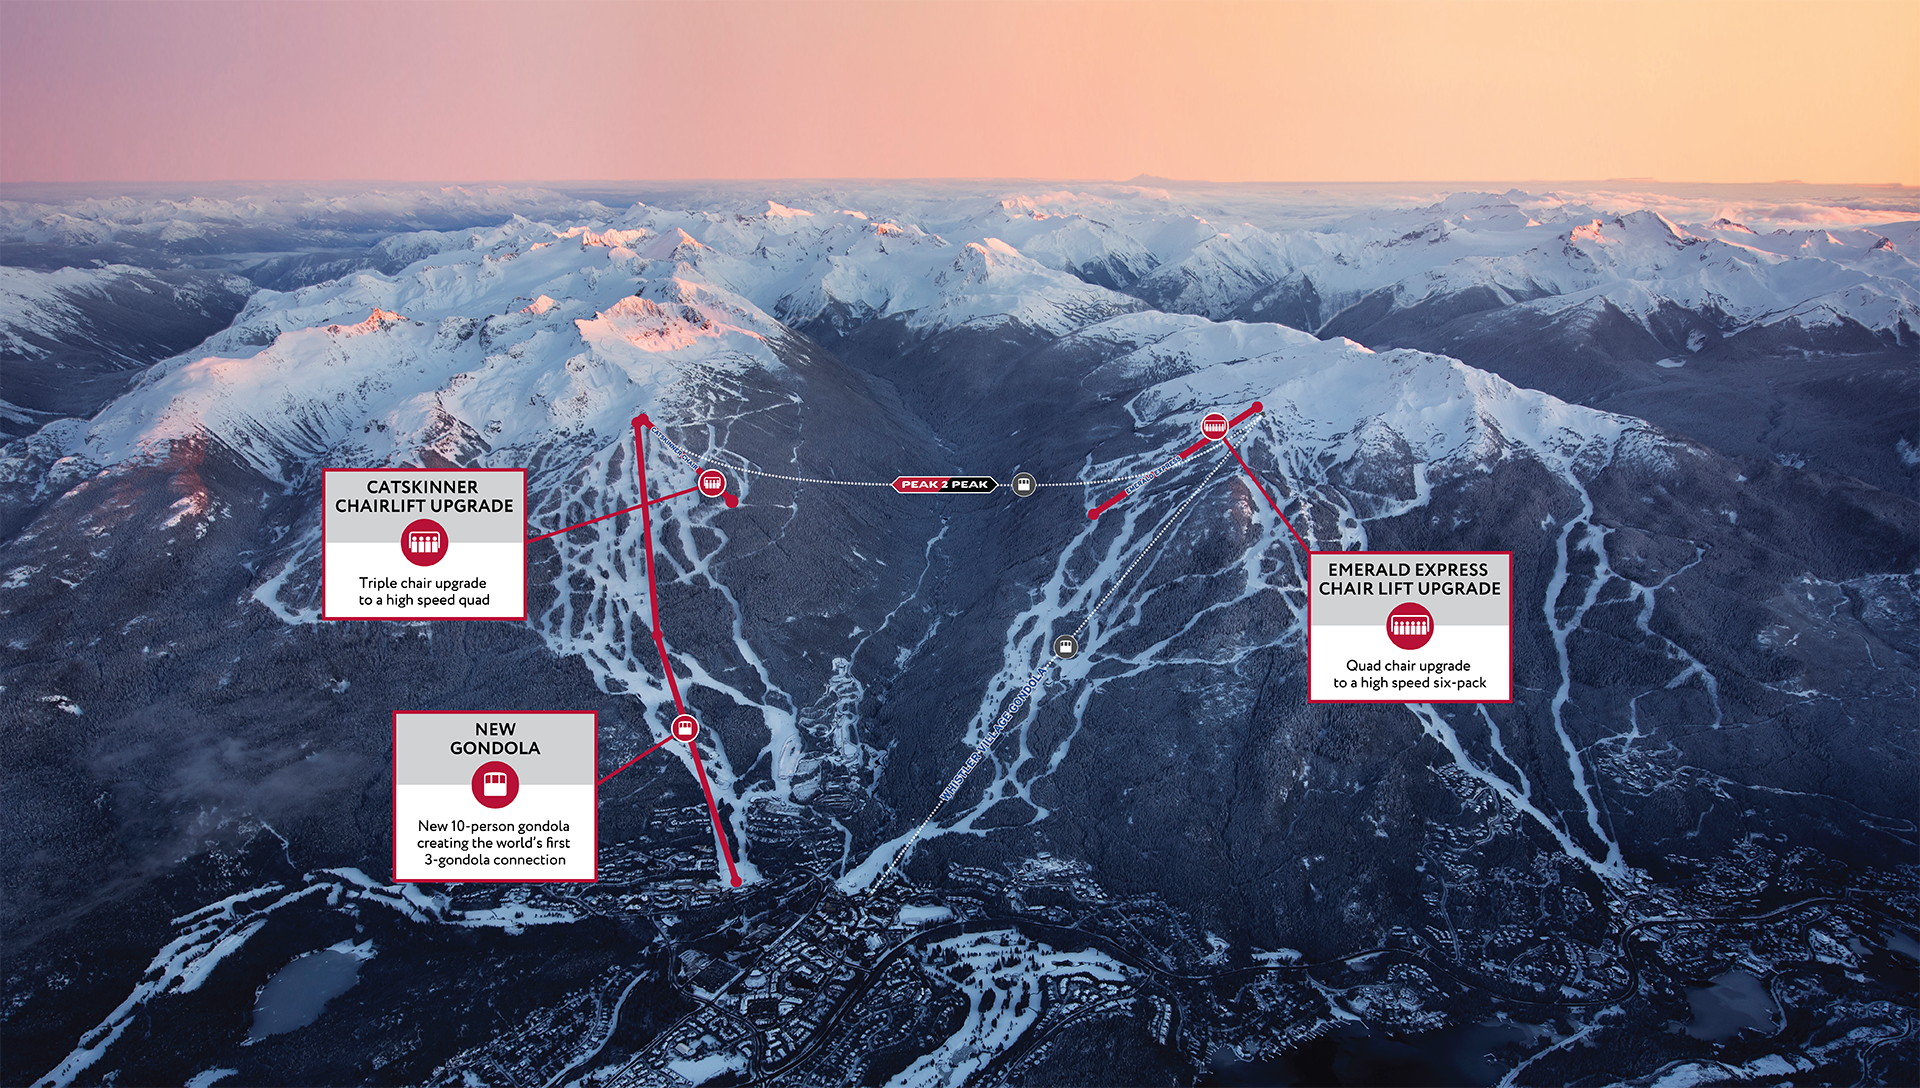 Whistler Blackcomb Overview Map